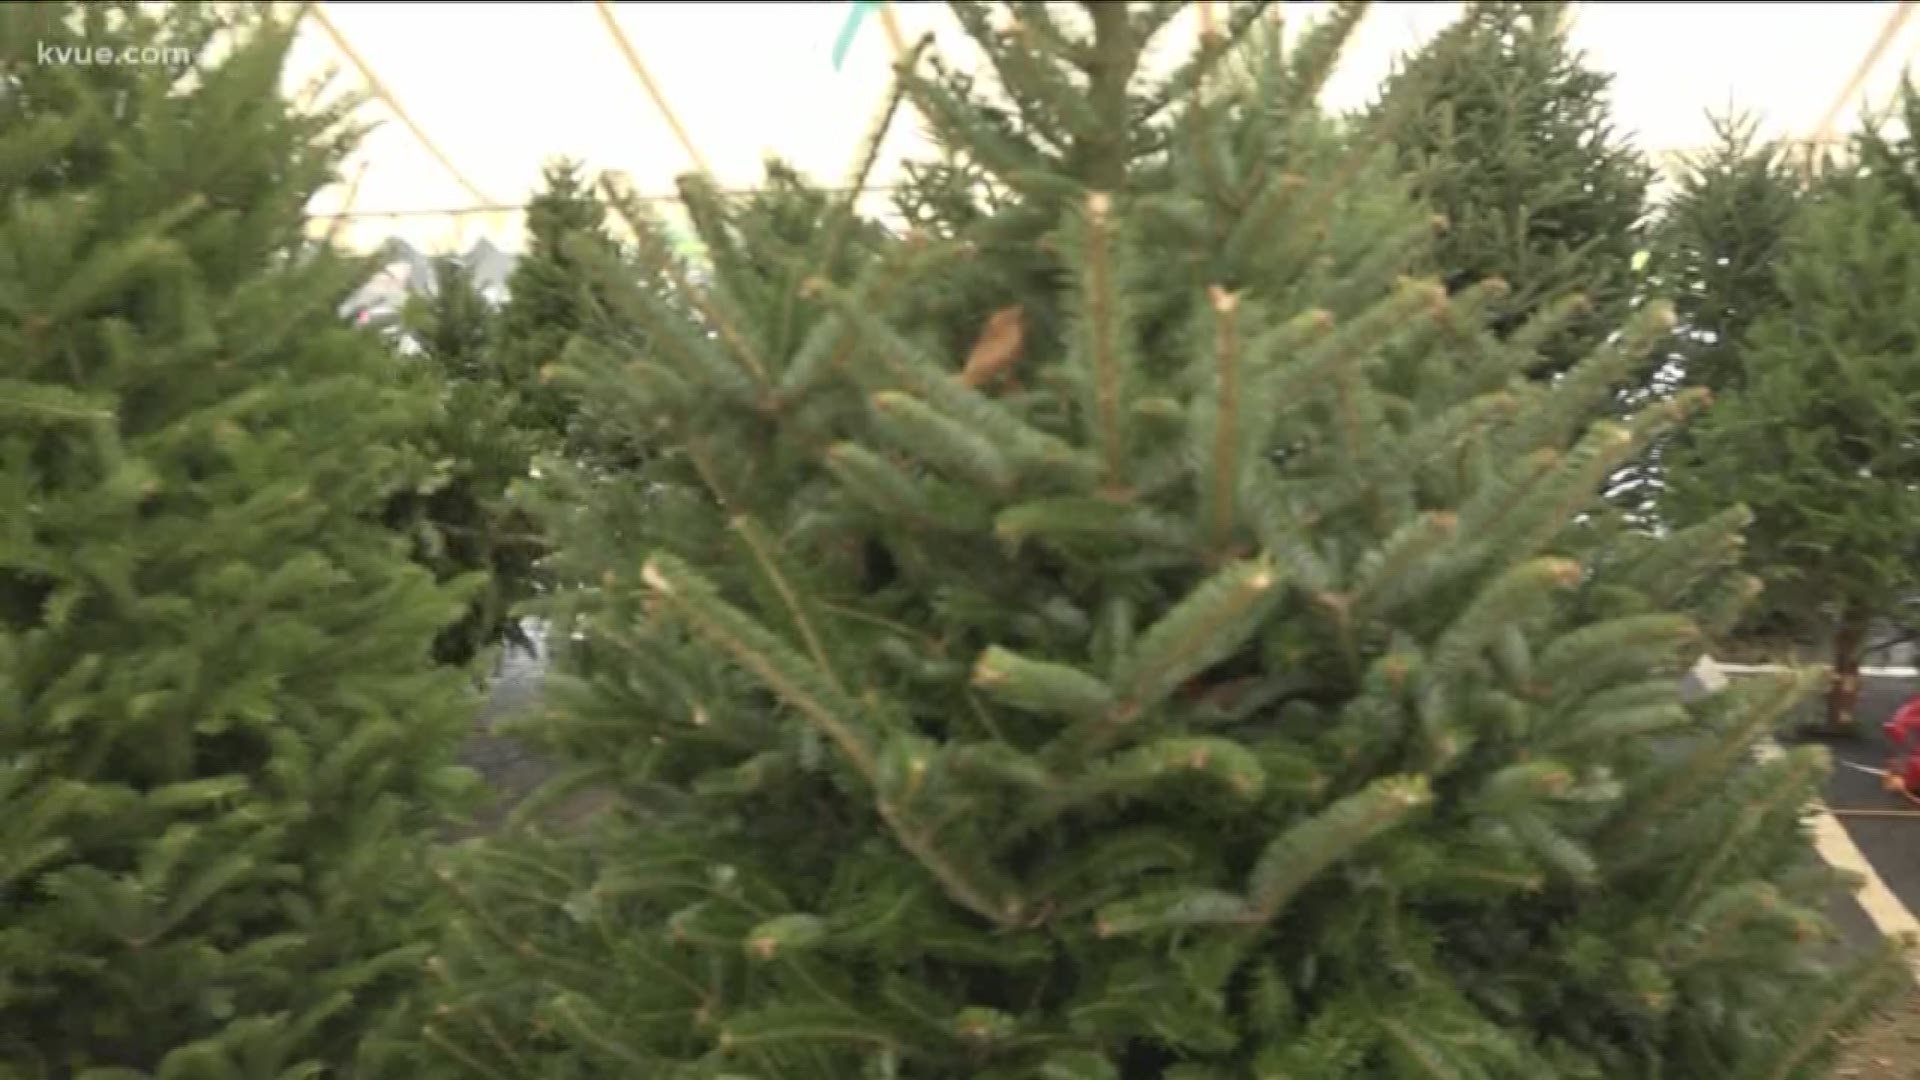 A national Christmas tree shortage has been reported since the recession a decade ago, but Papa Noel Trees told KVUE the impact has weakened.